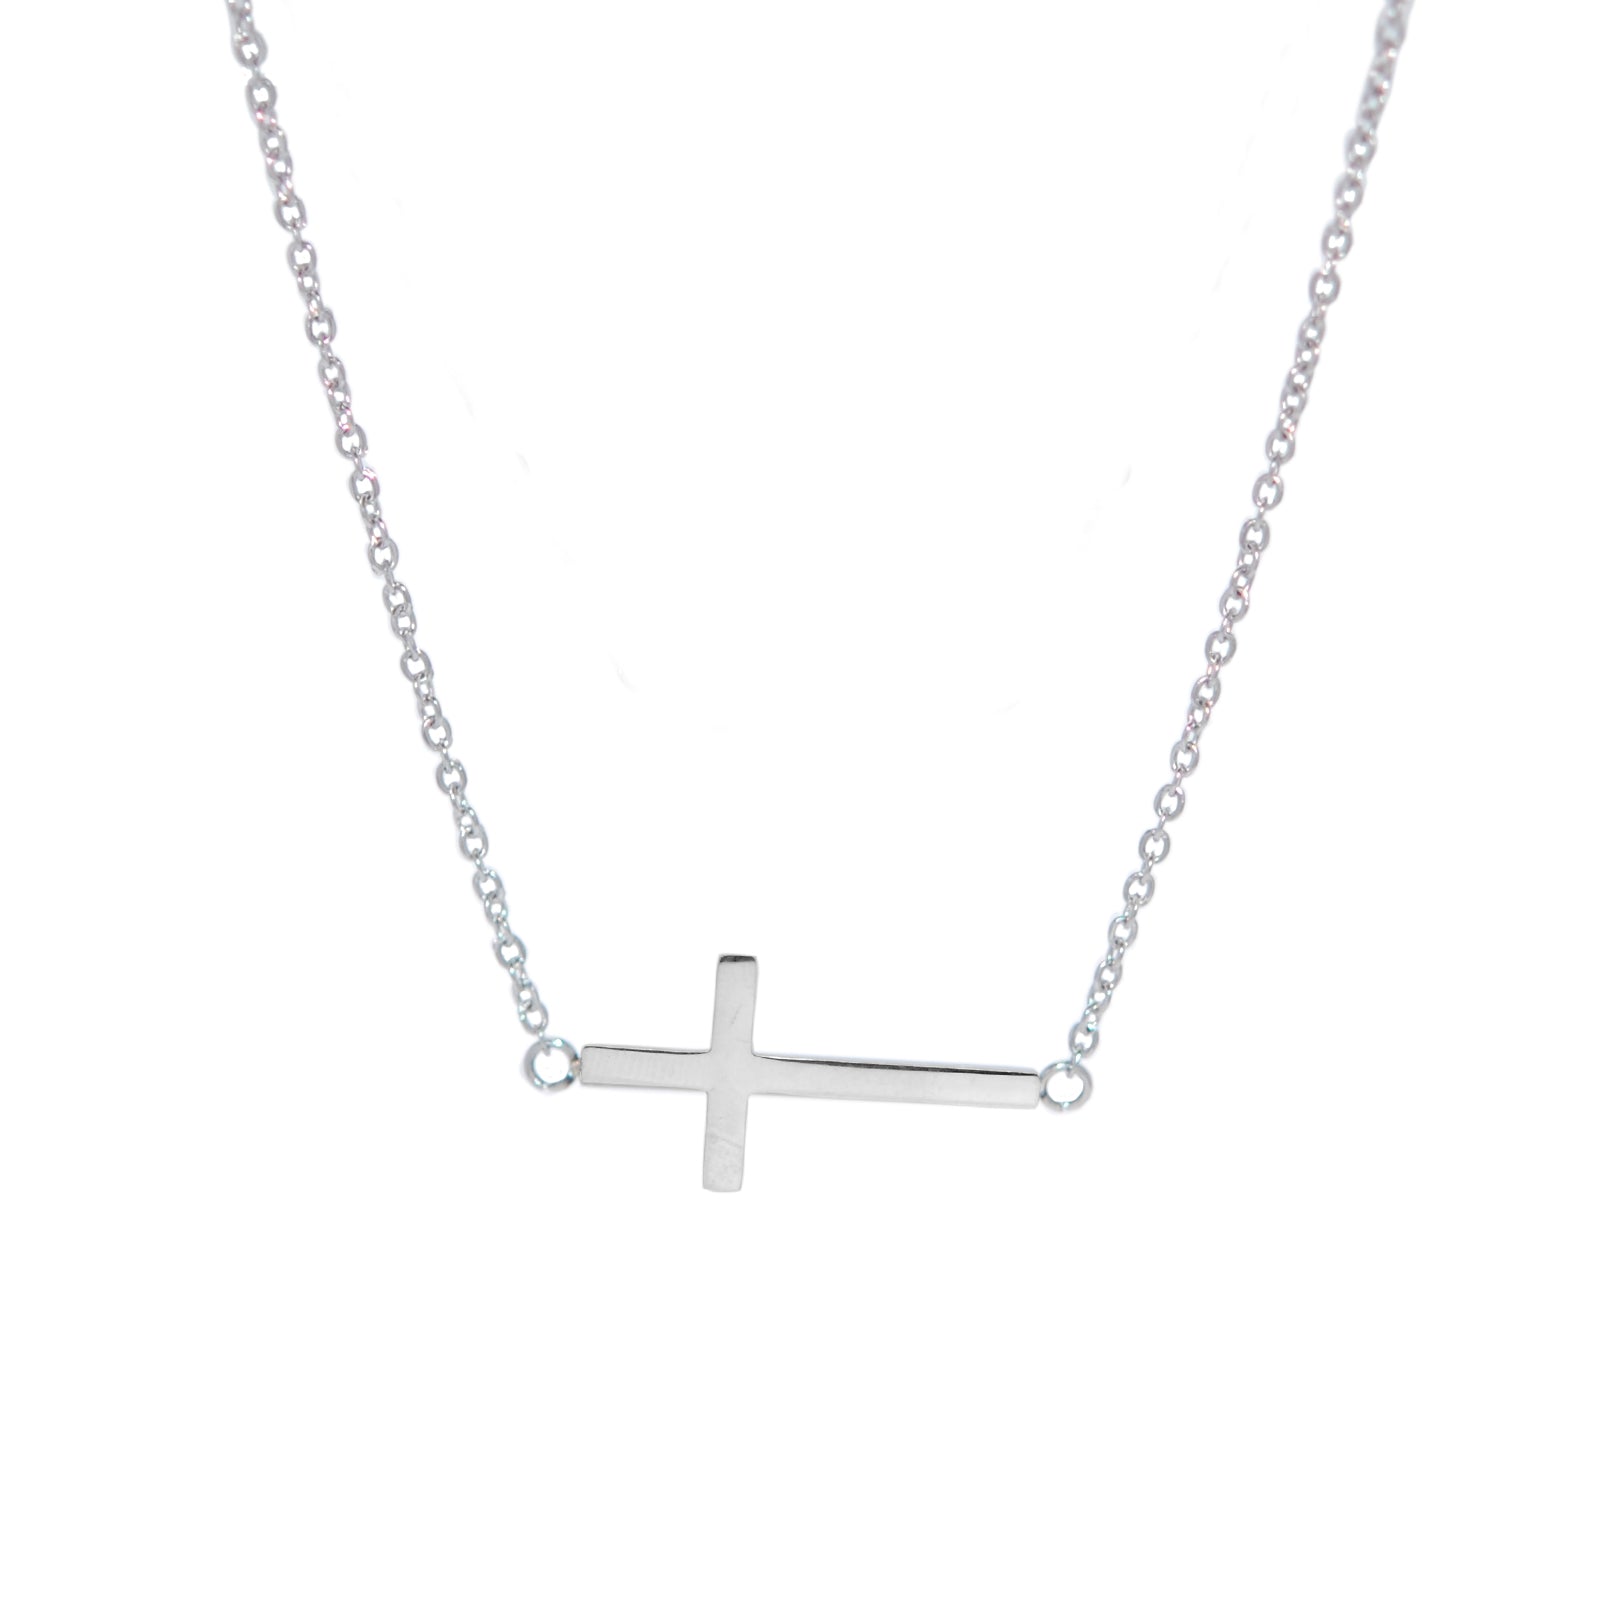 ESN 5702: Flat Crucifix Necklace w/ 17.5" + 2" Med Link Chain